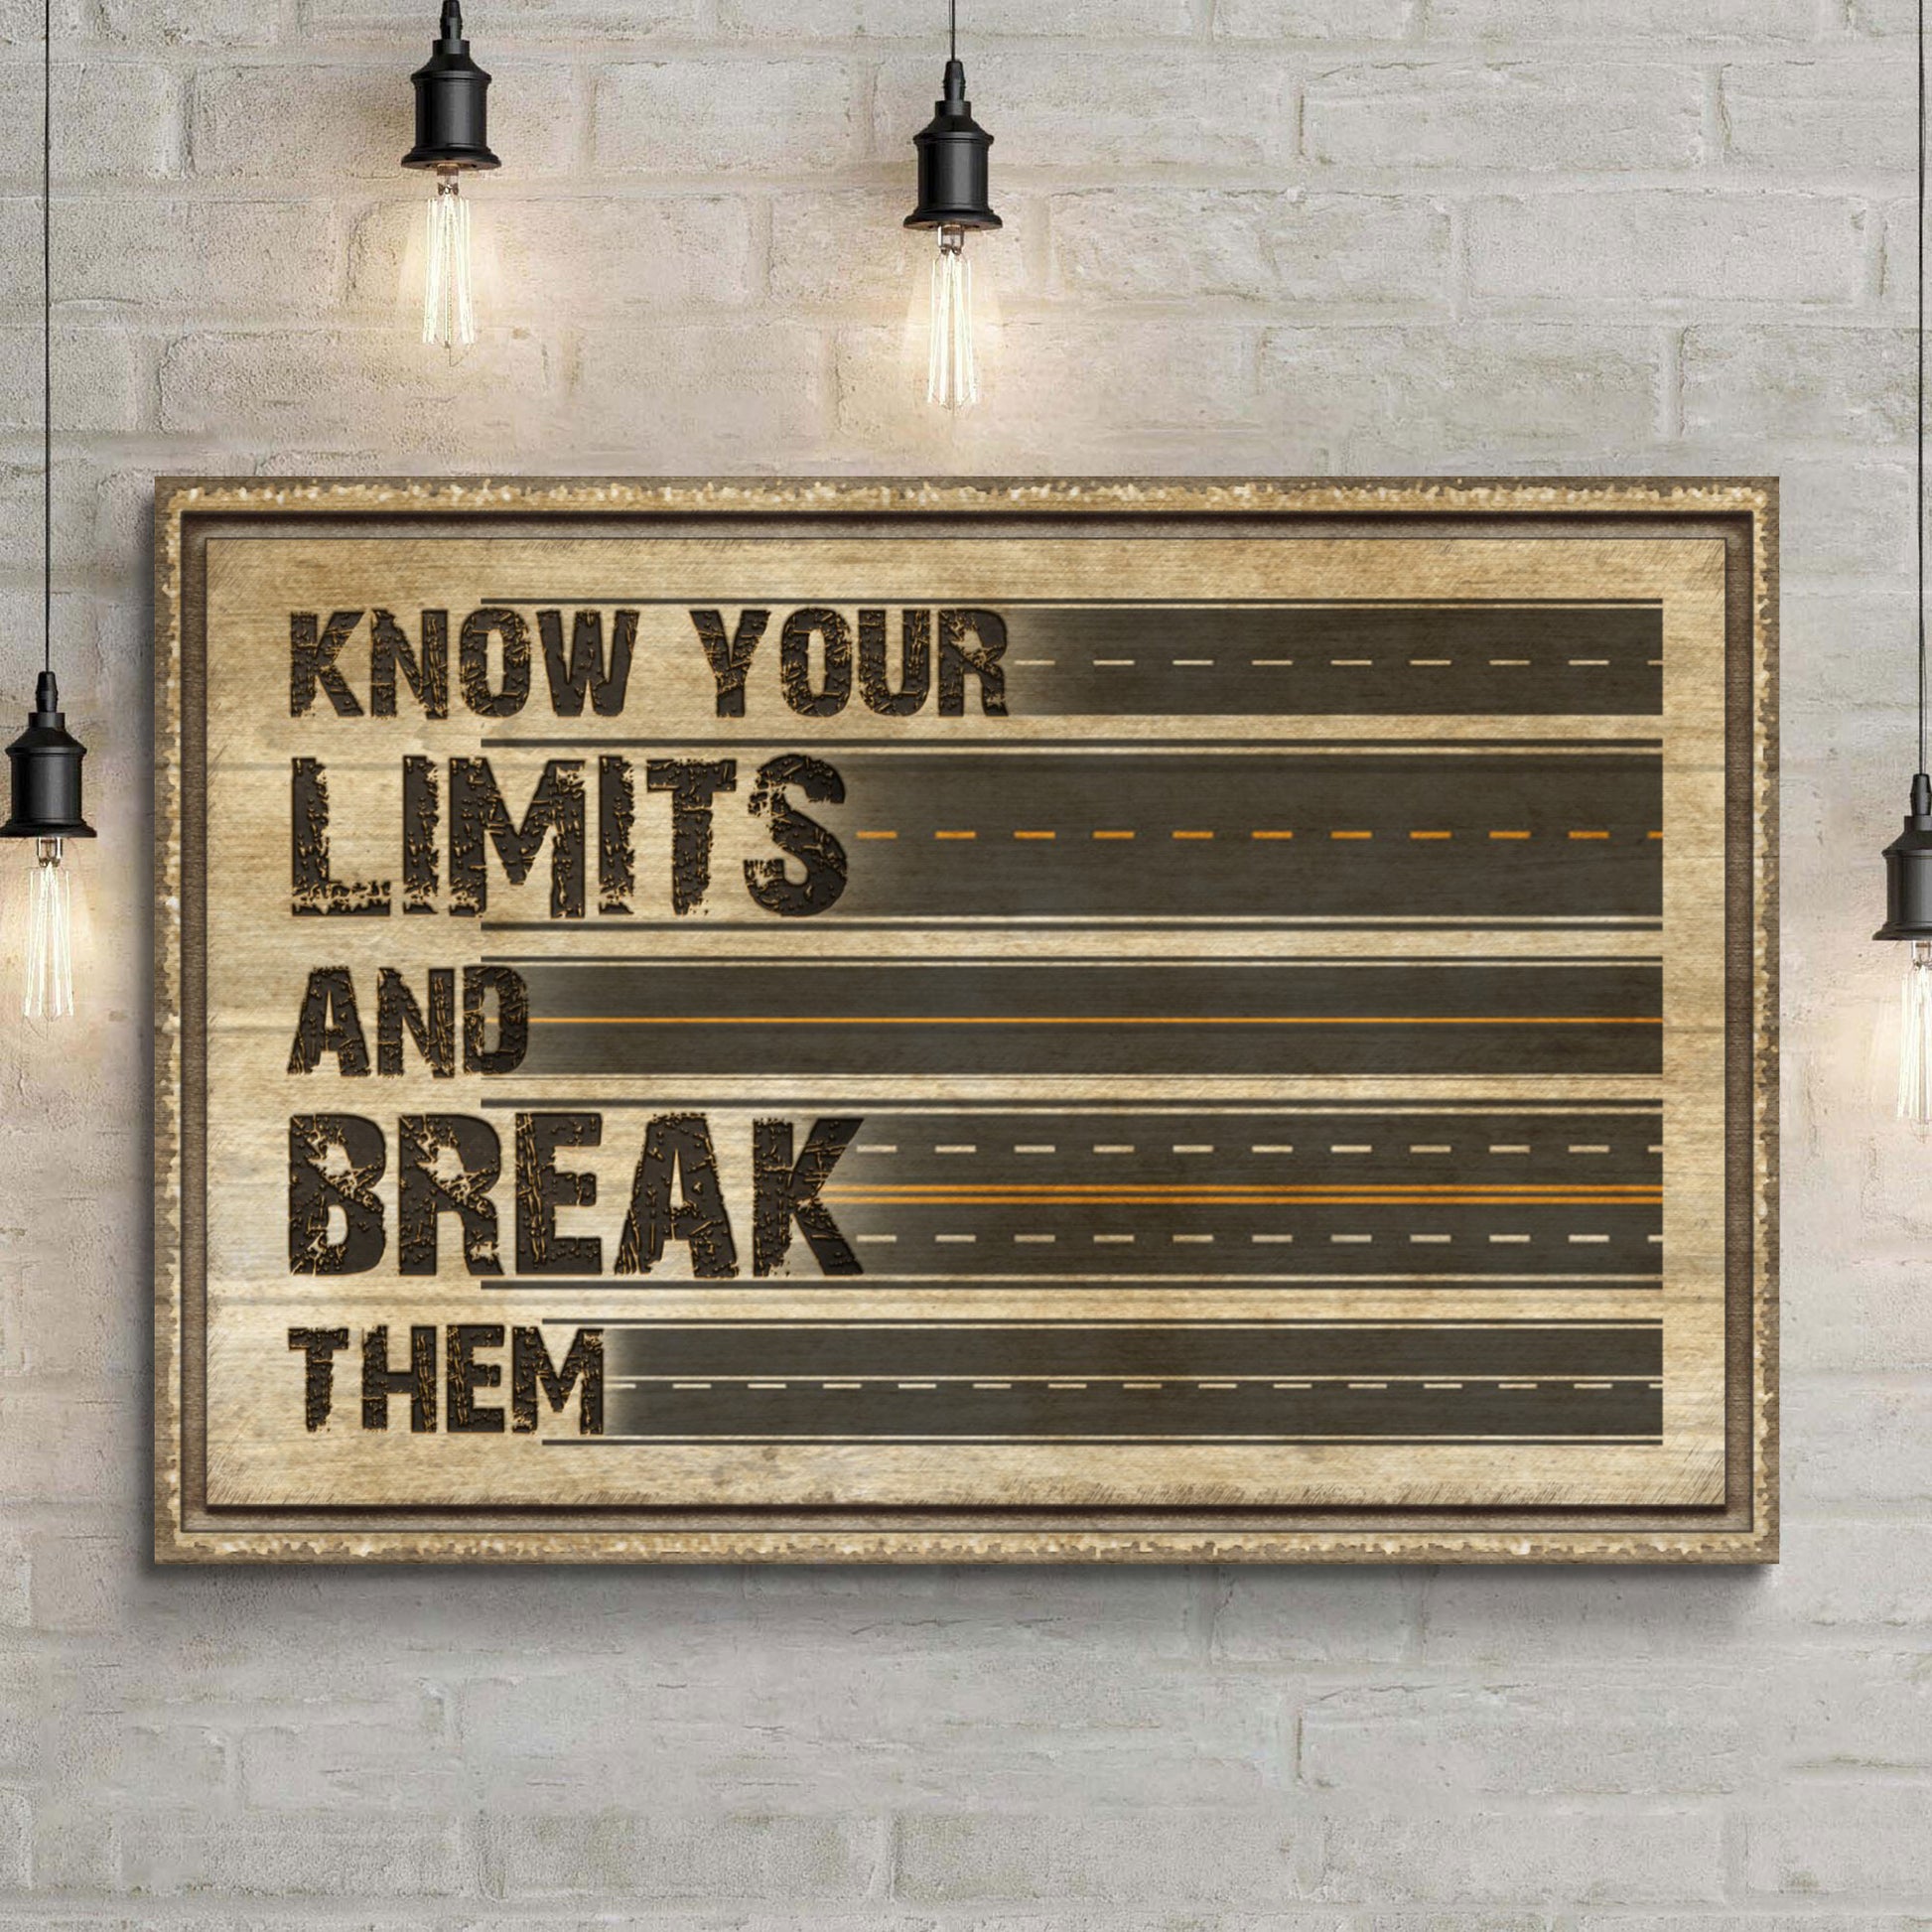 Know Your Limits Sign - Image by Tailored Canvases